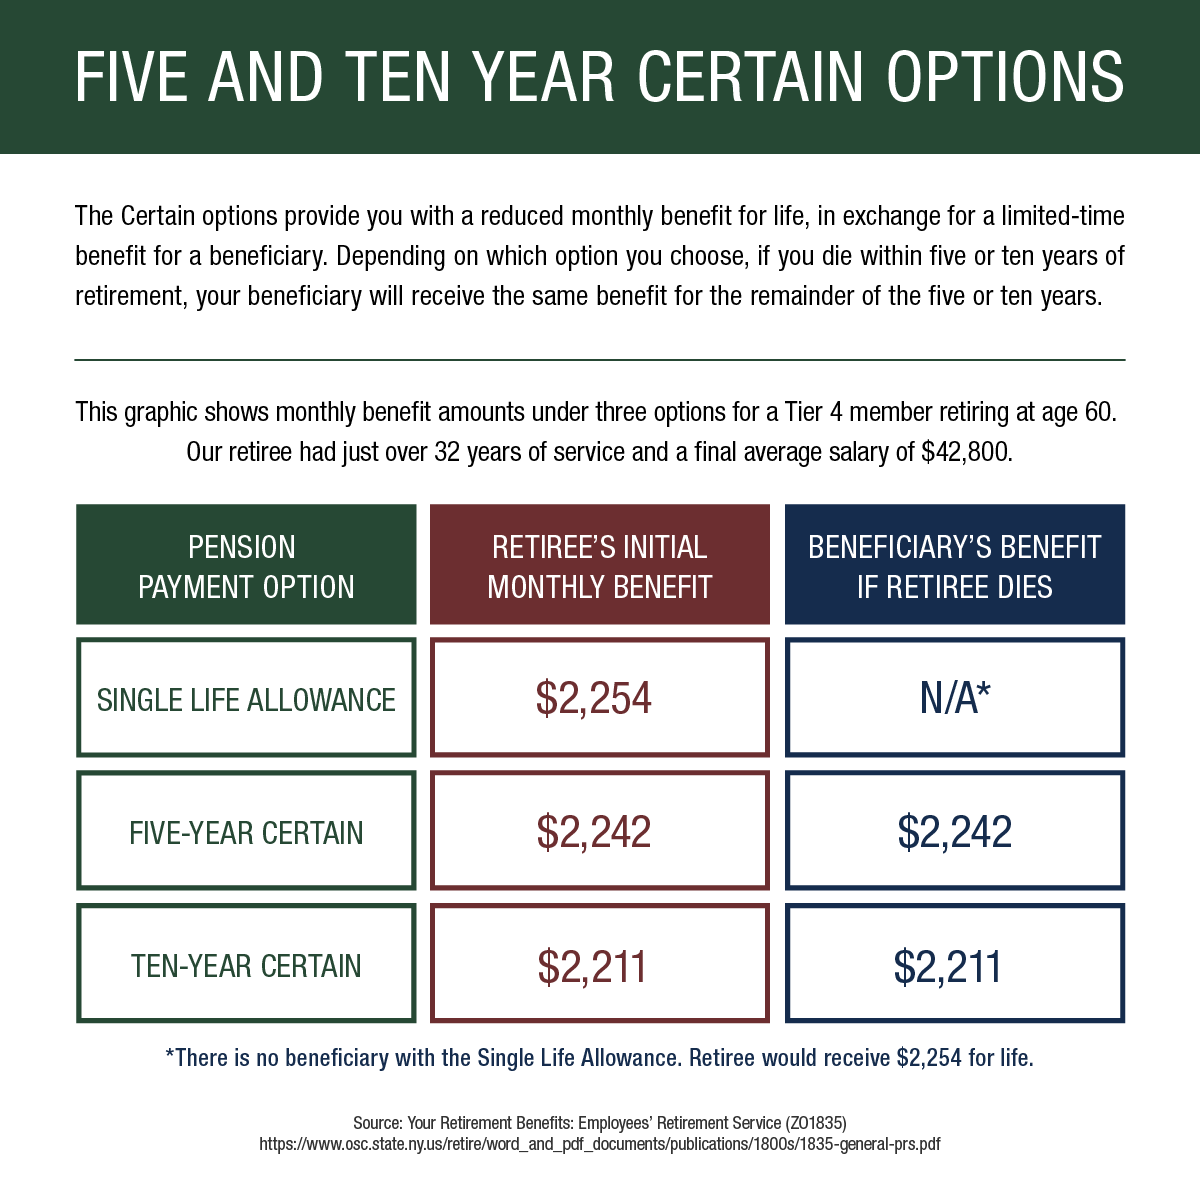 pension payment options